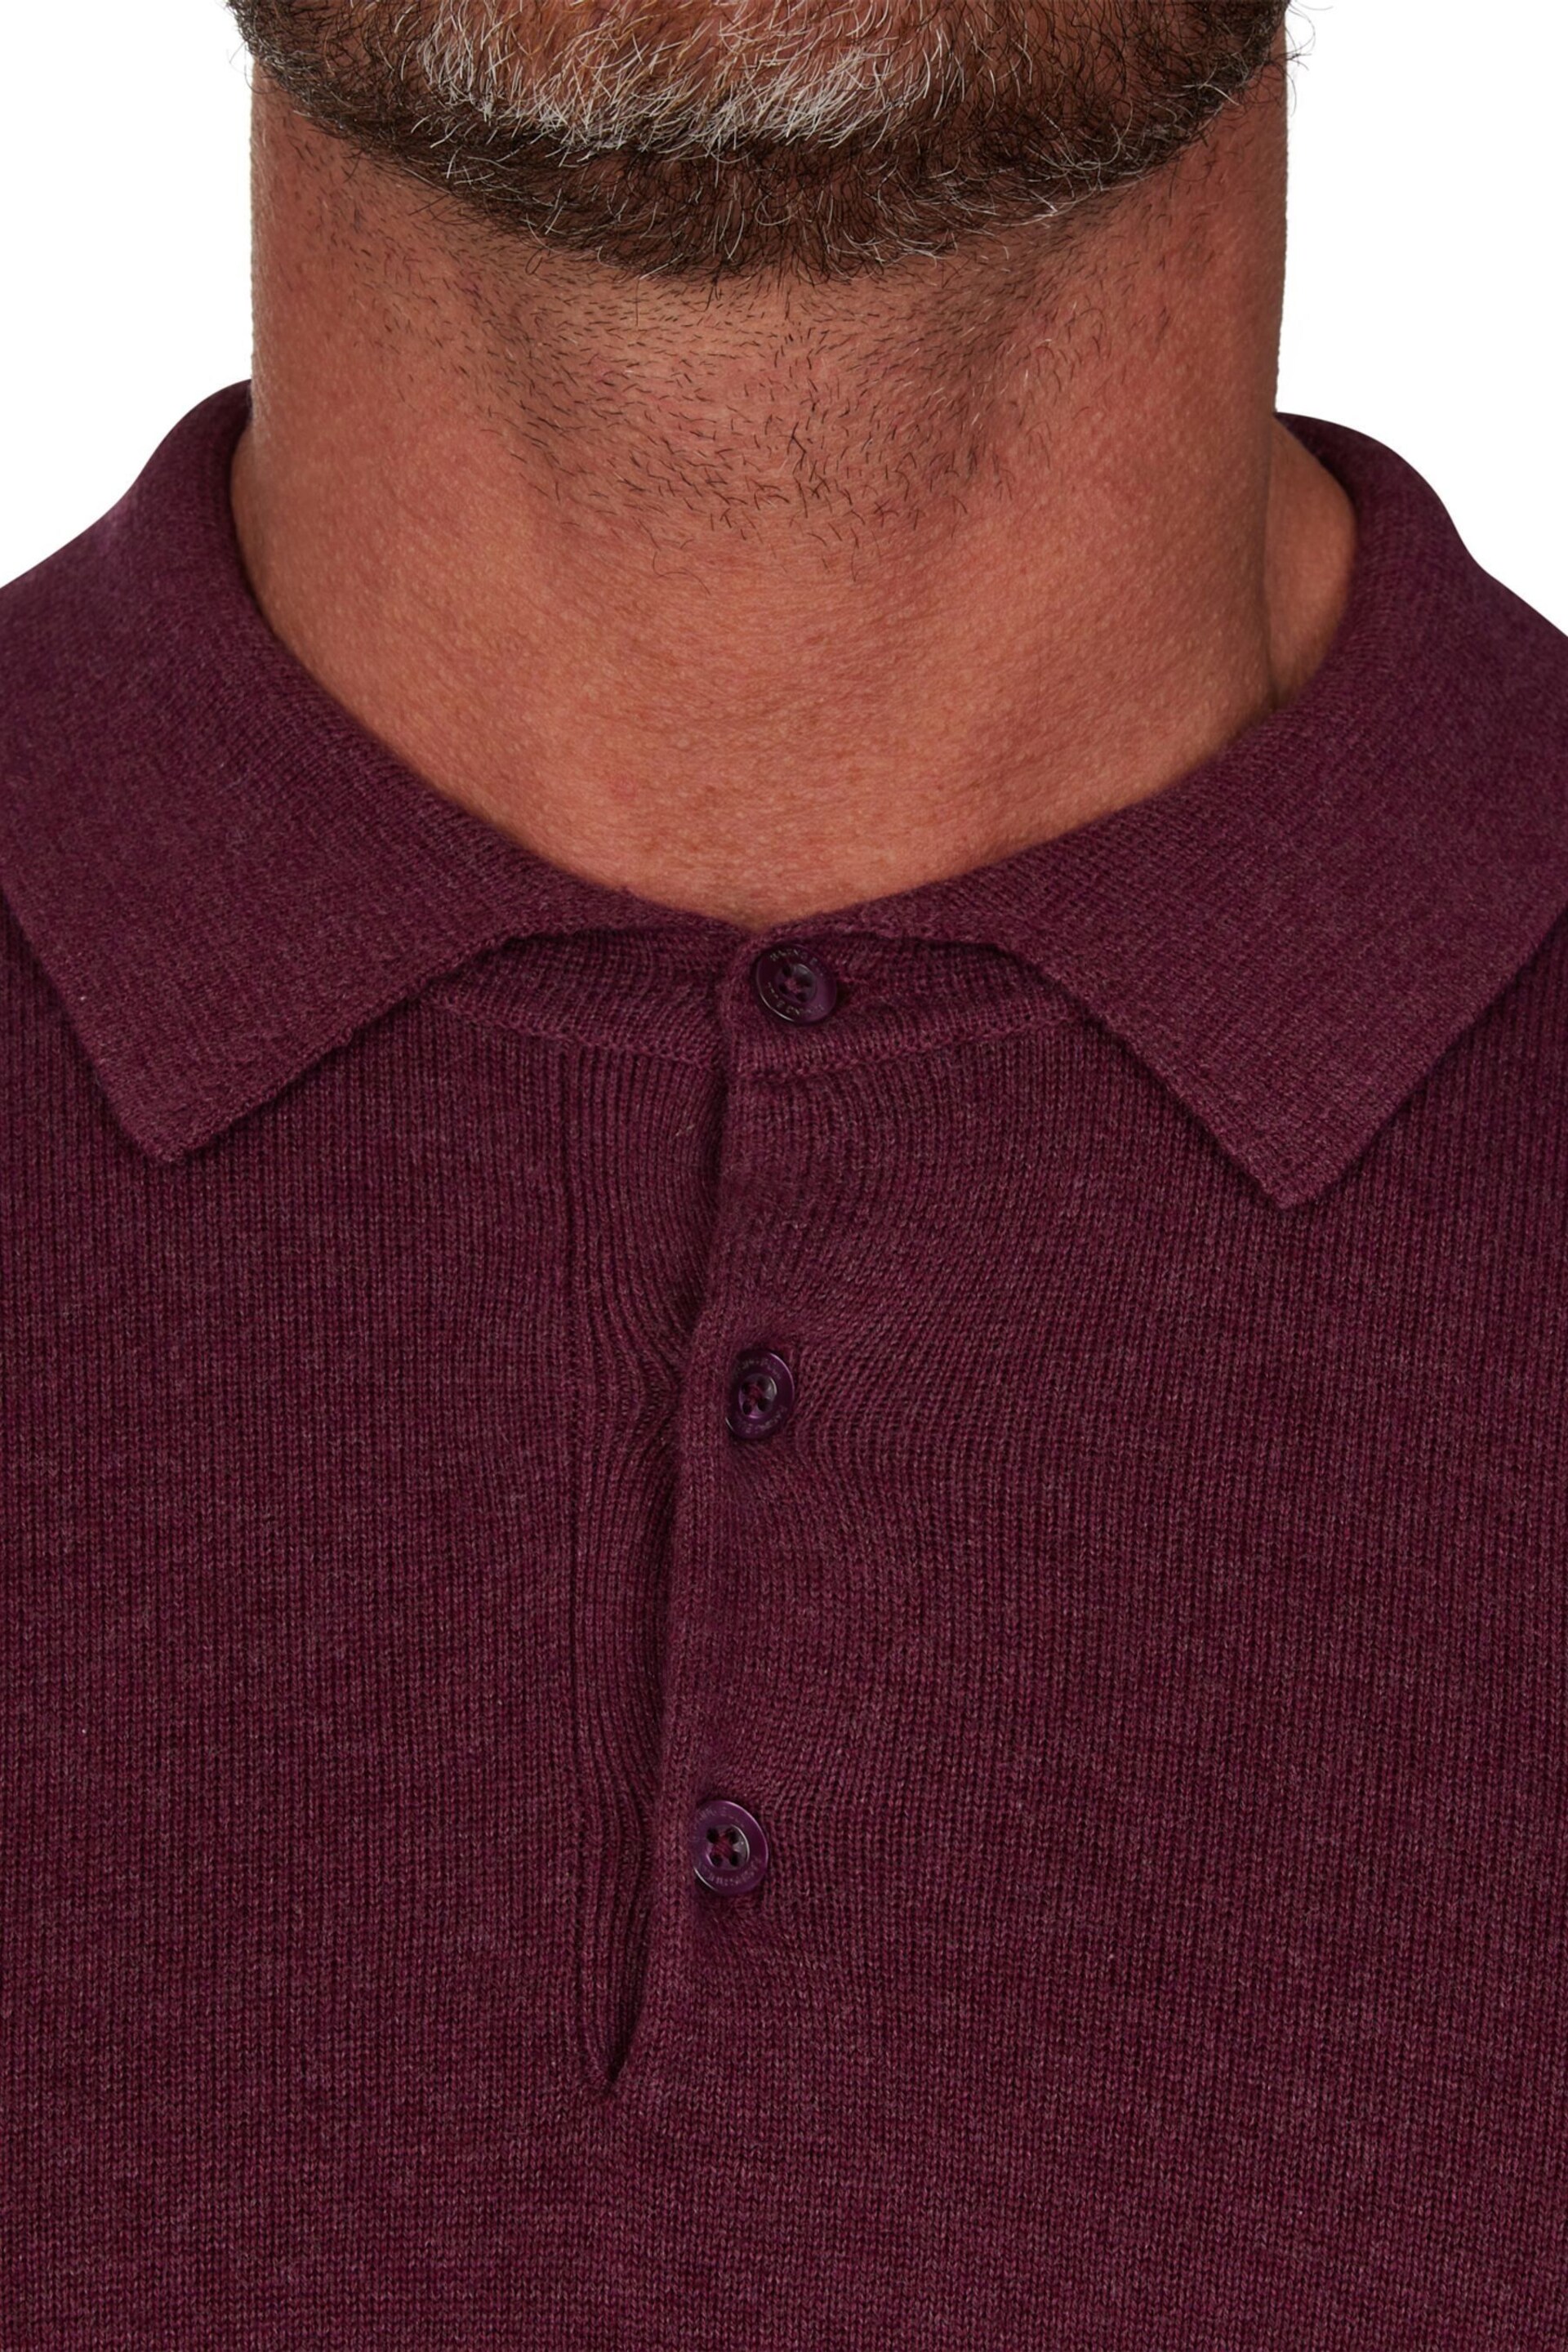 Raging Bull Long Sleeve Knitted Polo - Image 4 of 6